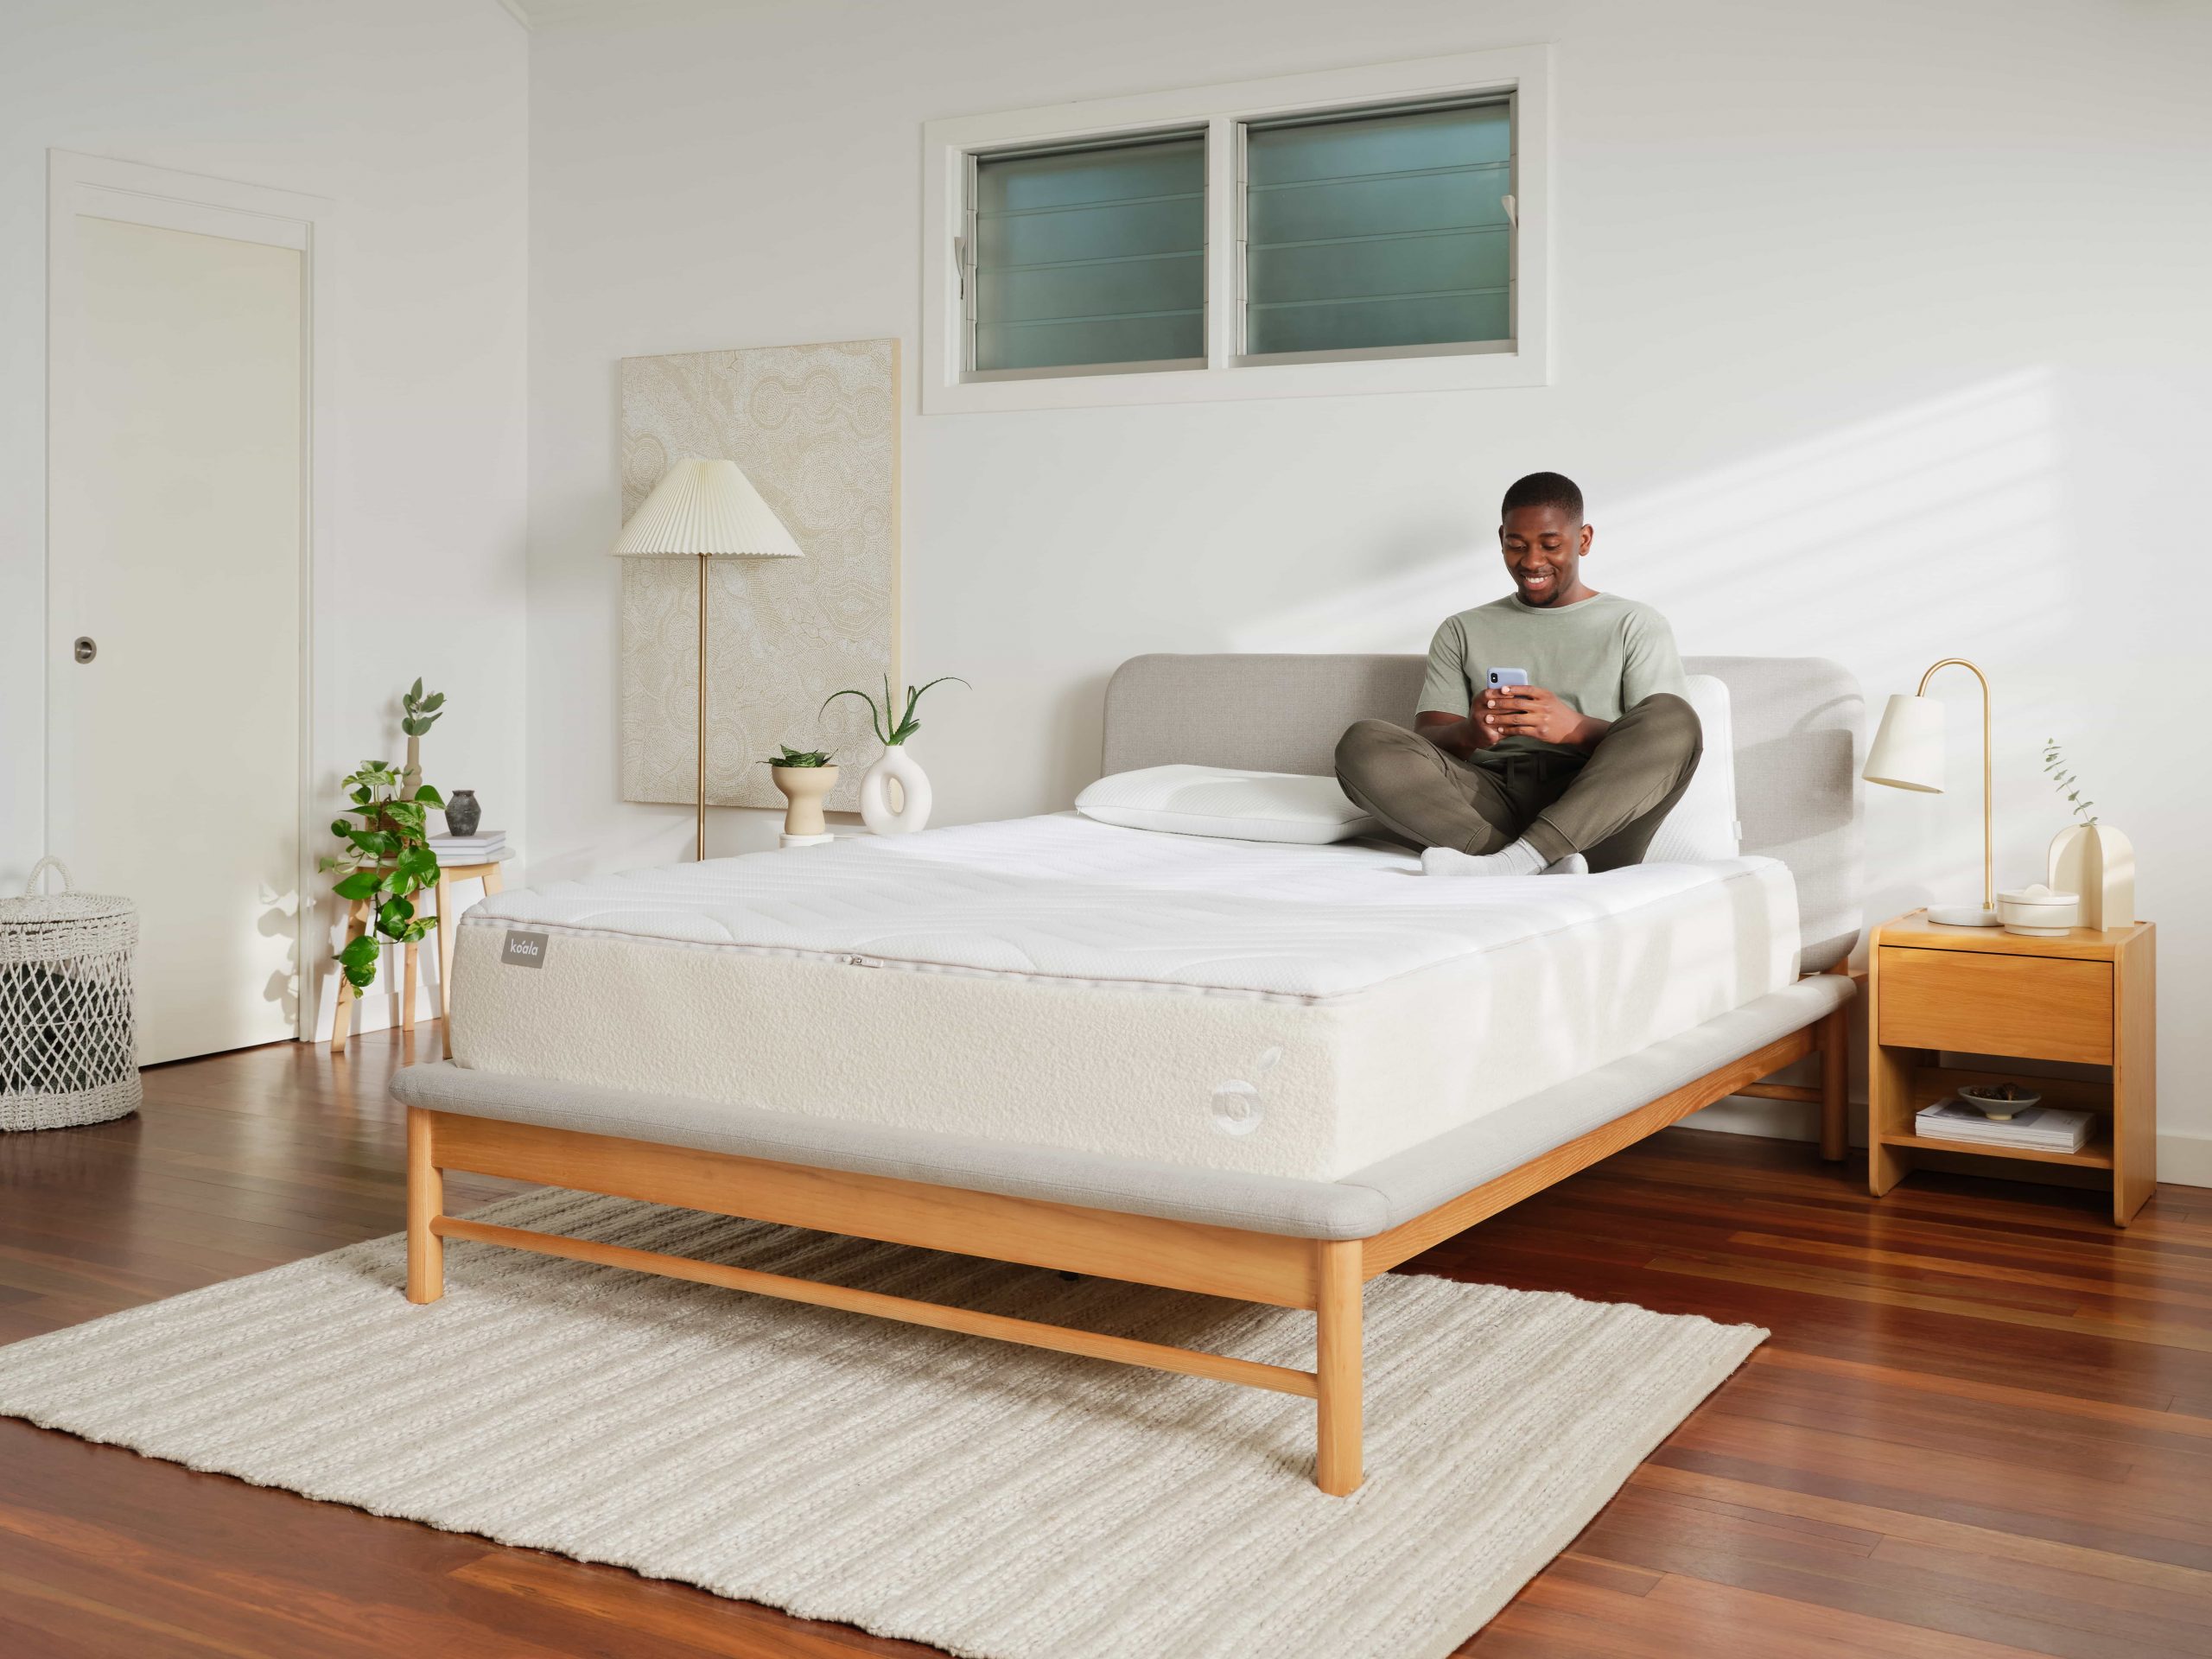  A man sits on a Koala mattress in a minimalist bedroom researching how often you should change your mattress on his smartphone.